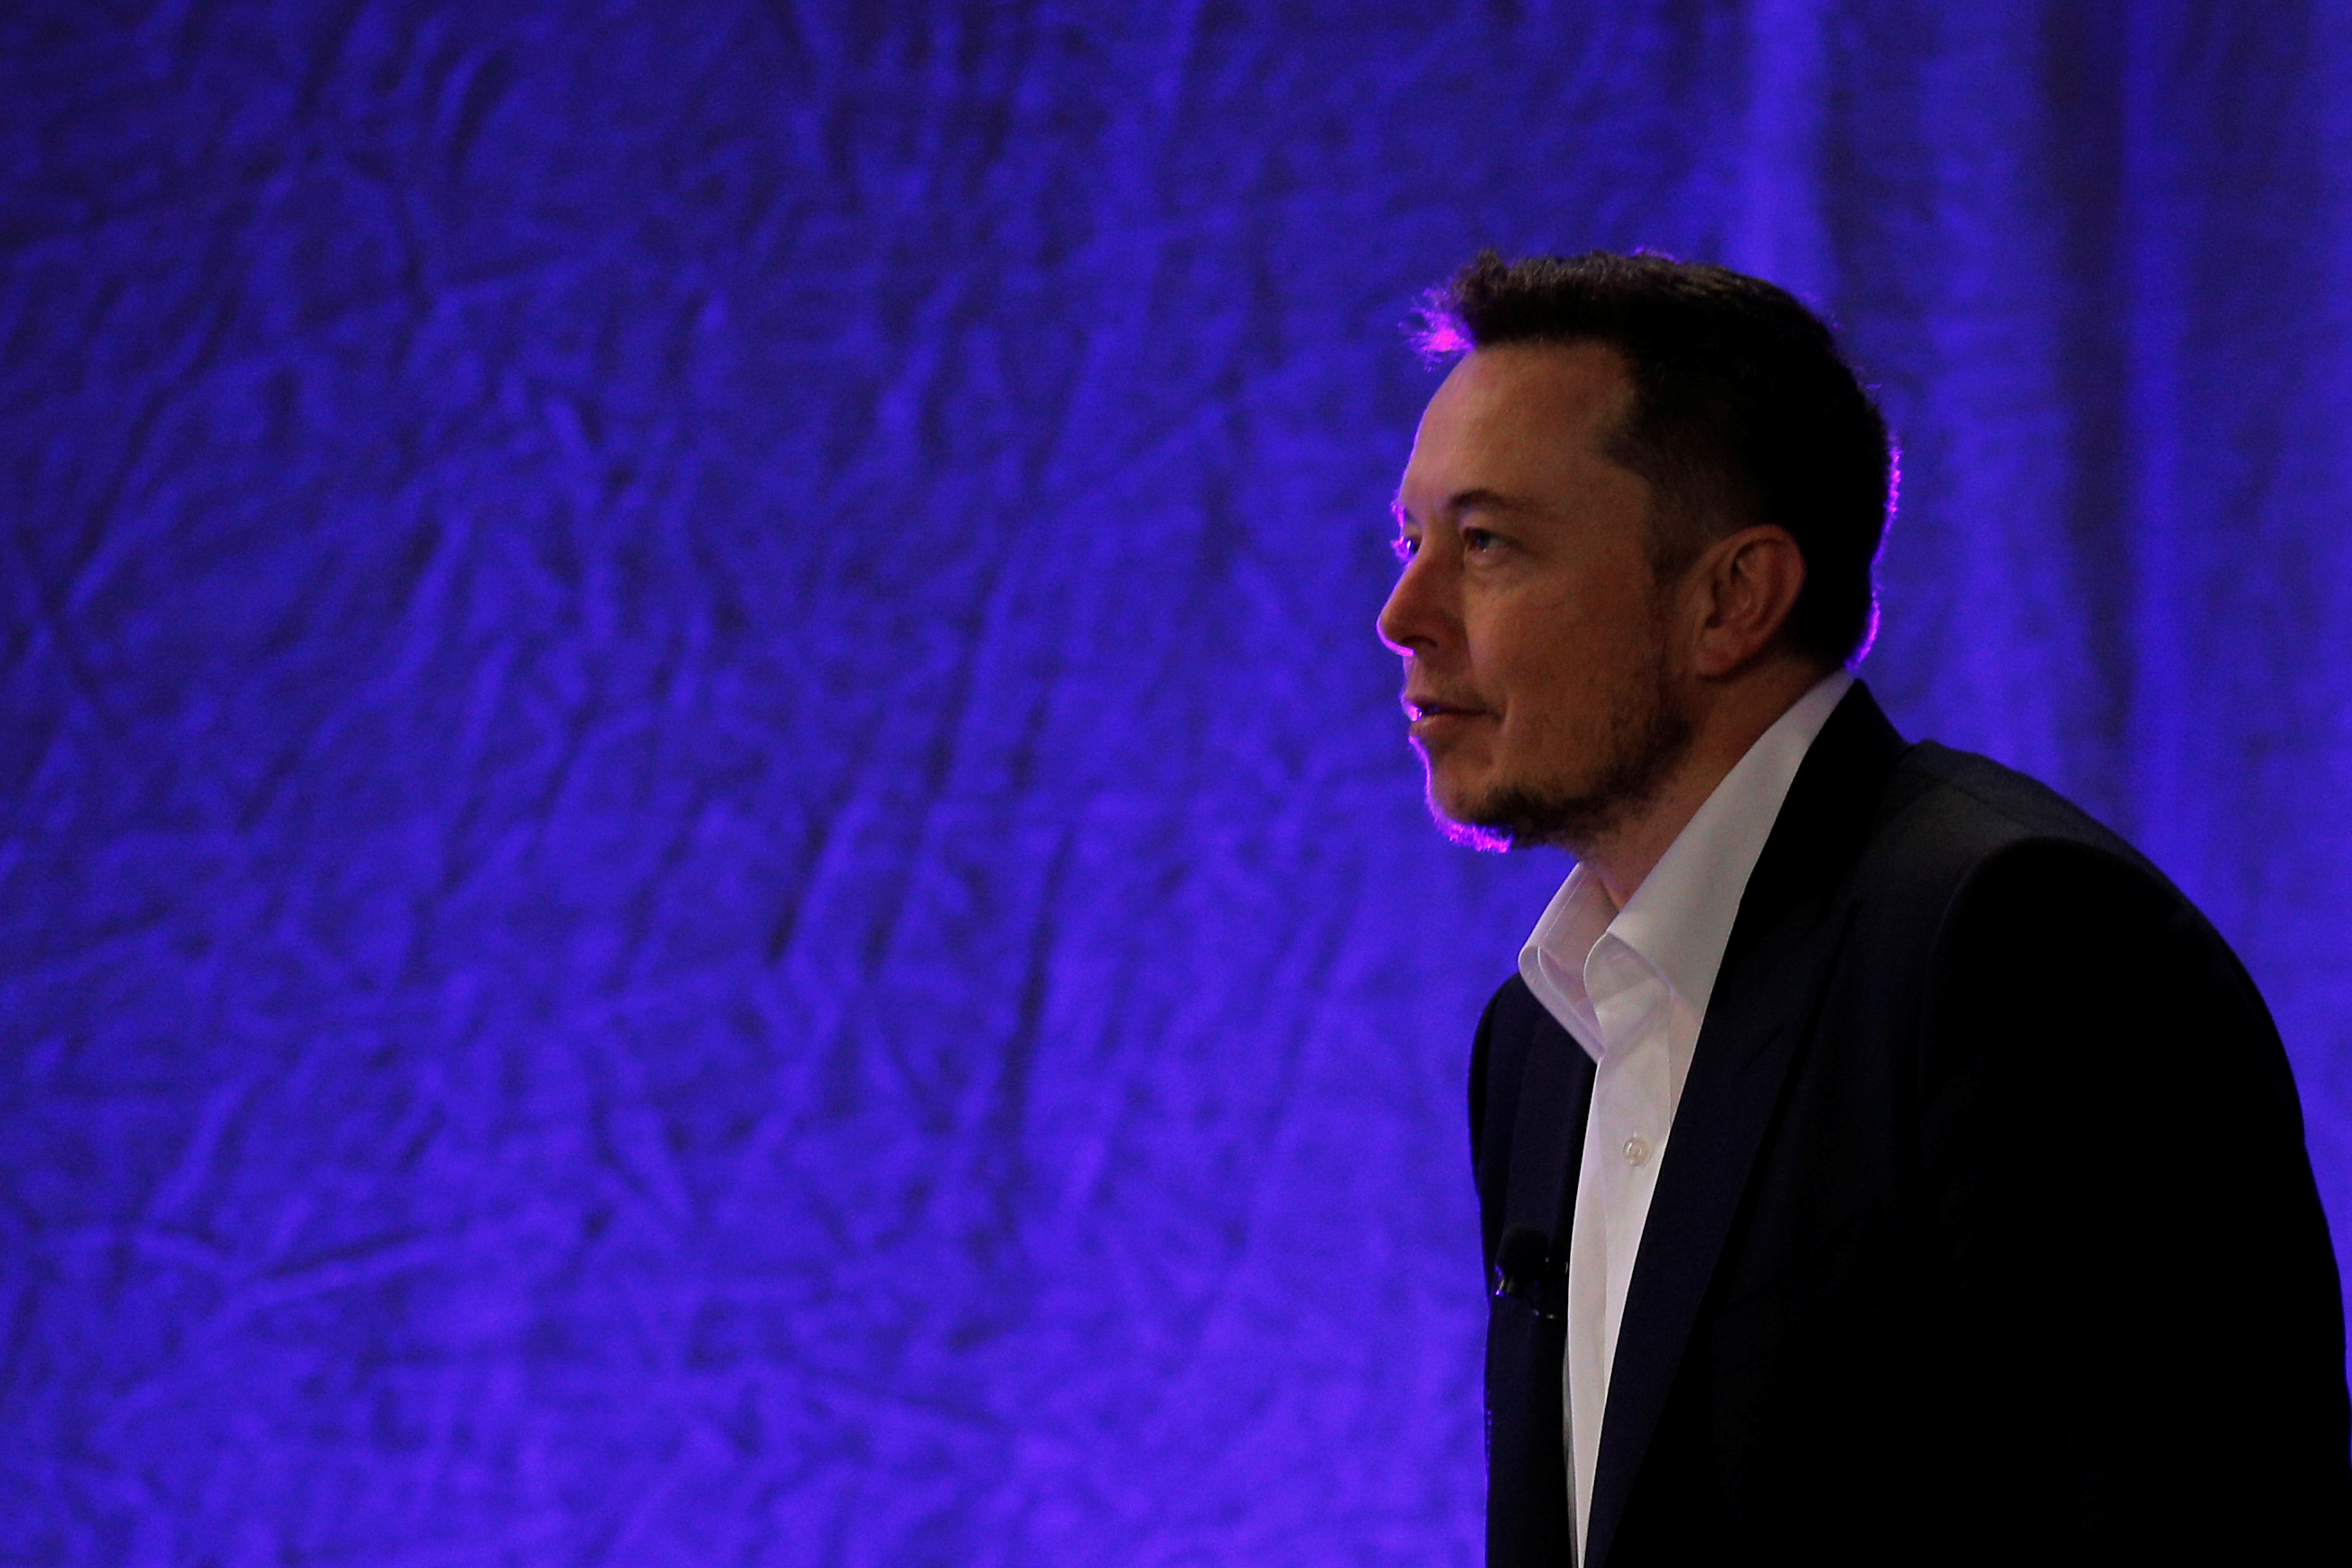 Tesla Motors CEO Elon Musk takes the stage to speak at the National Governors Association Summer Meeting in Providence